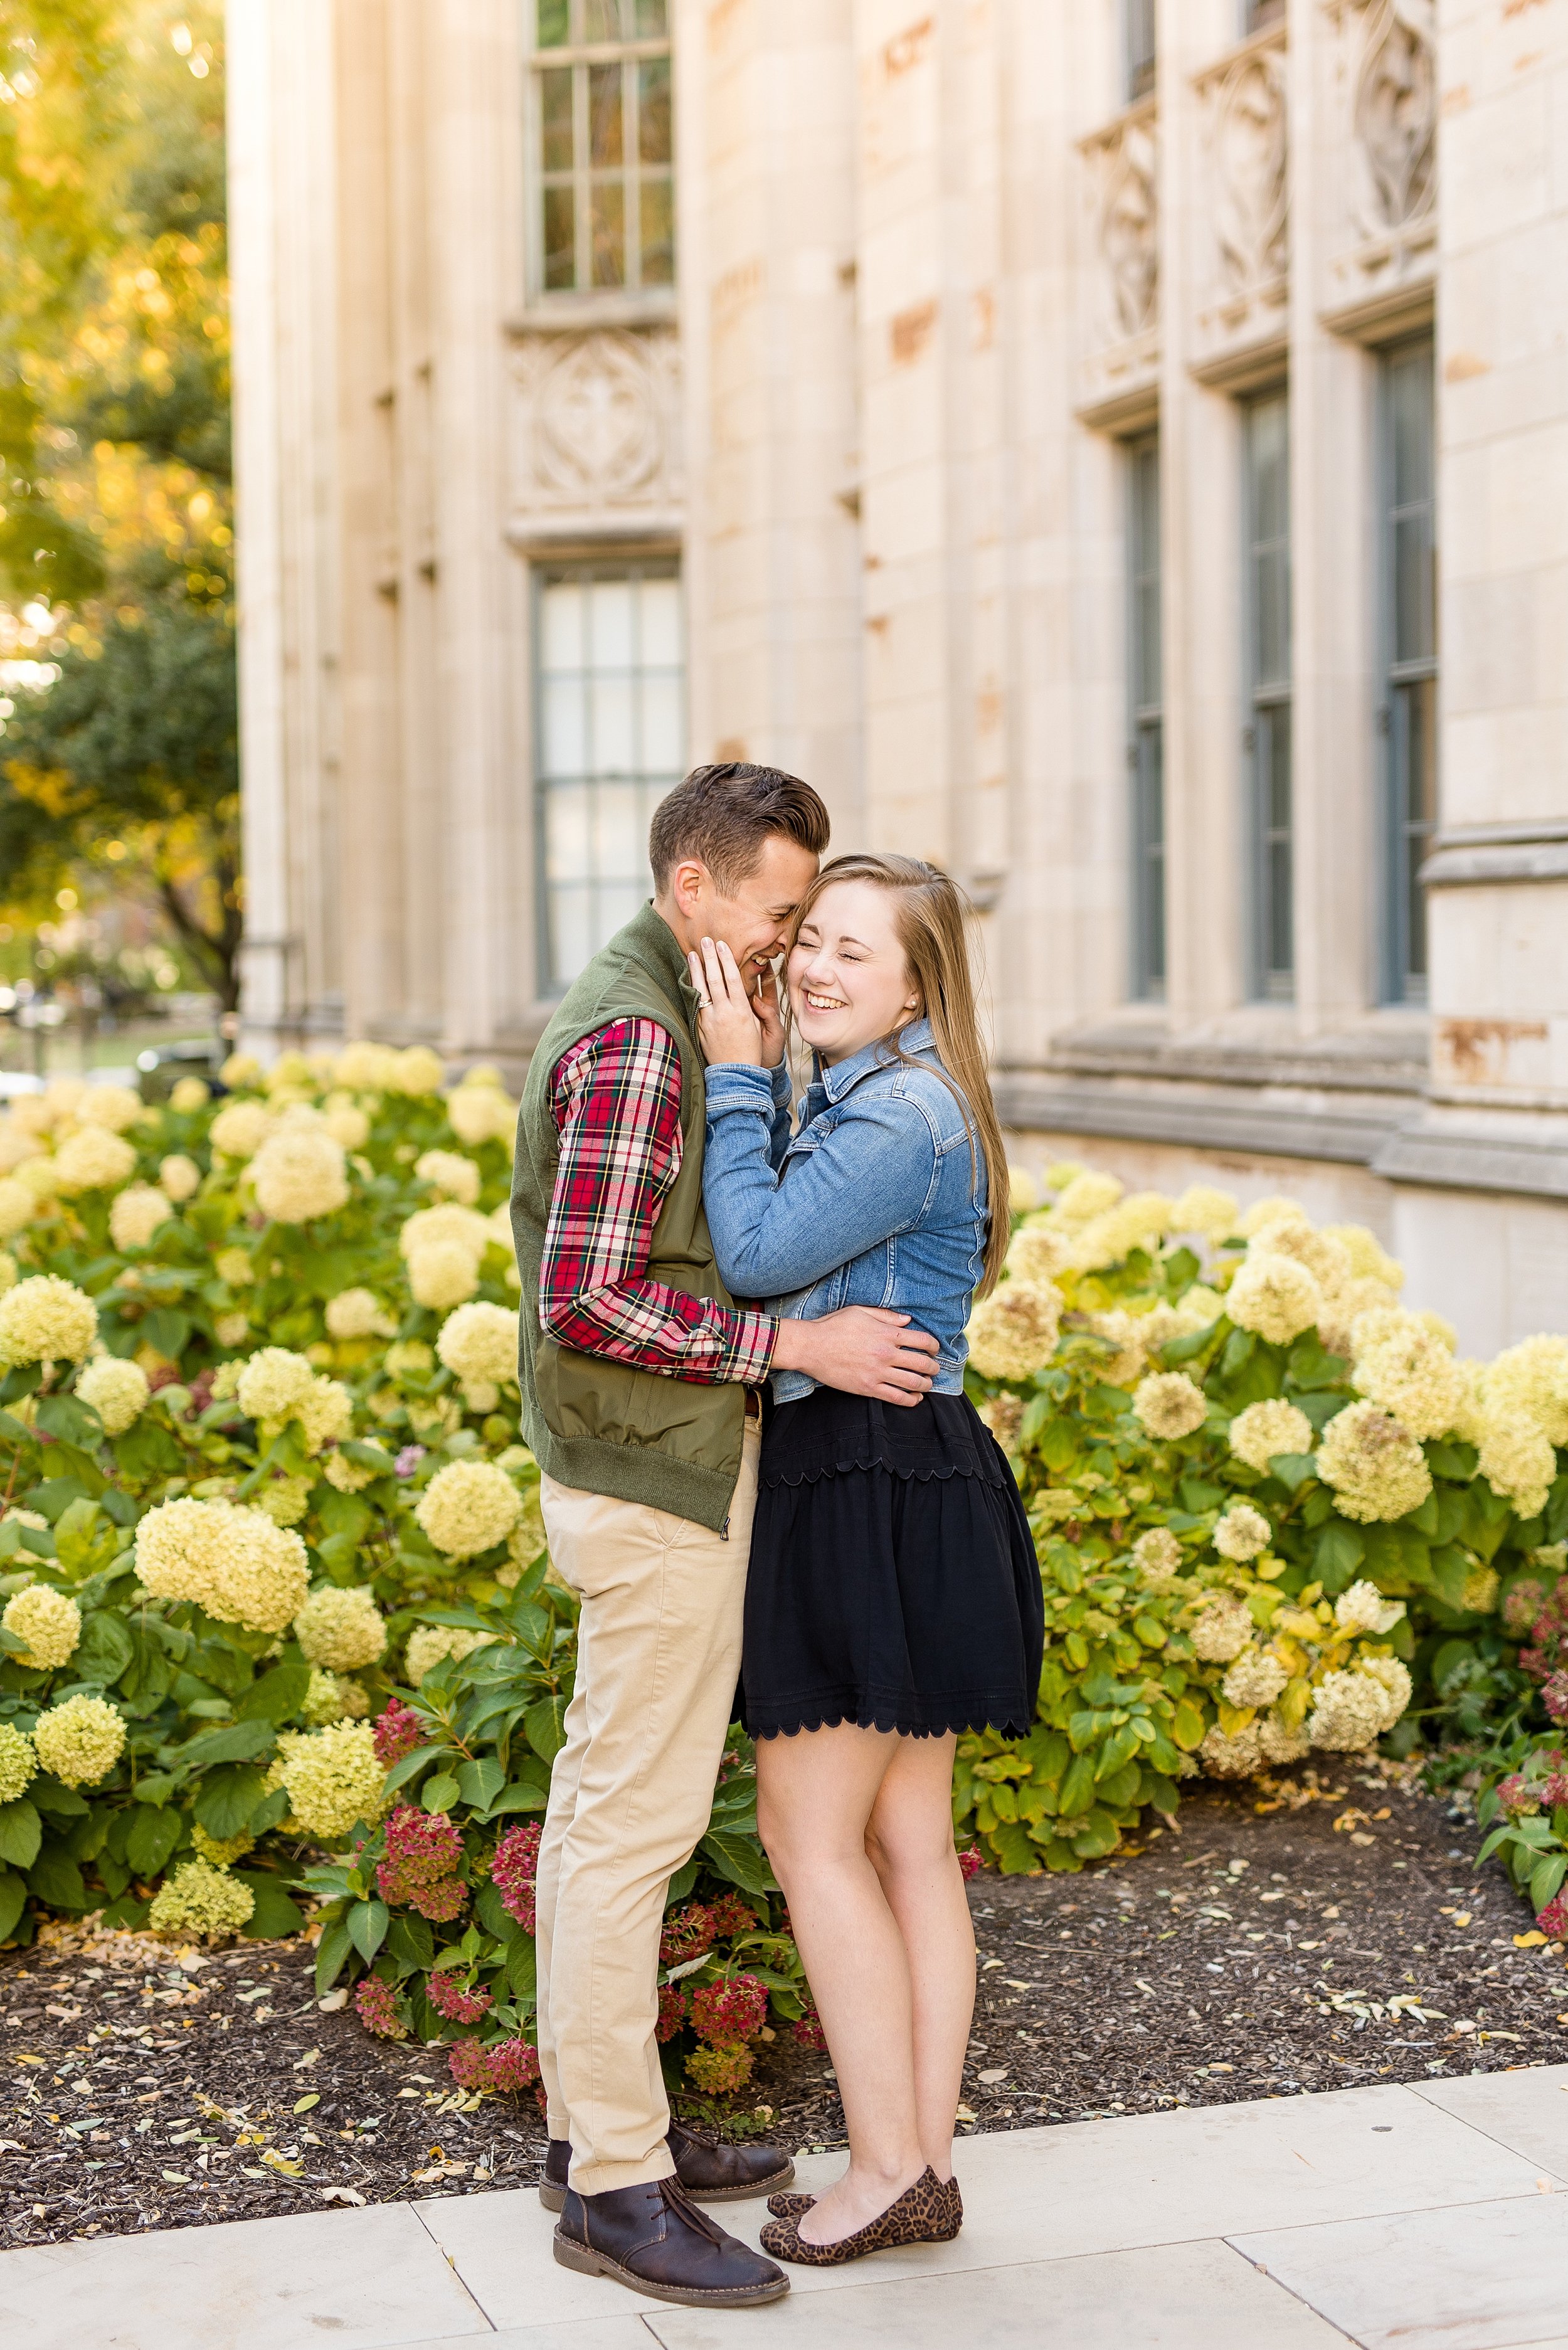 pittsburgh anniversary photographer, oakland engagement photos, university of pittsburgh engagement photos, heinz chapel engagement photos, cathedral of learning engagement photos